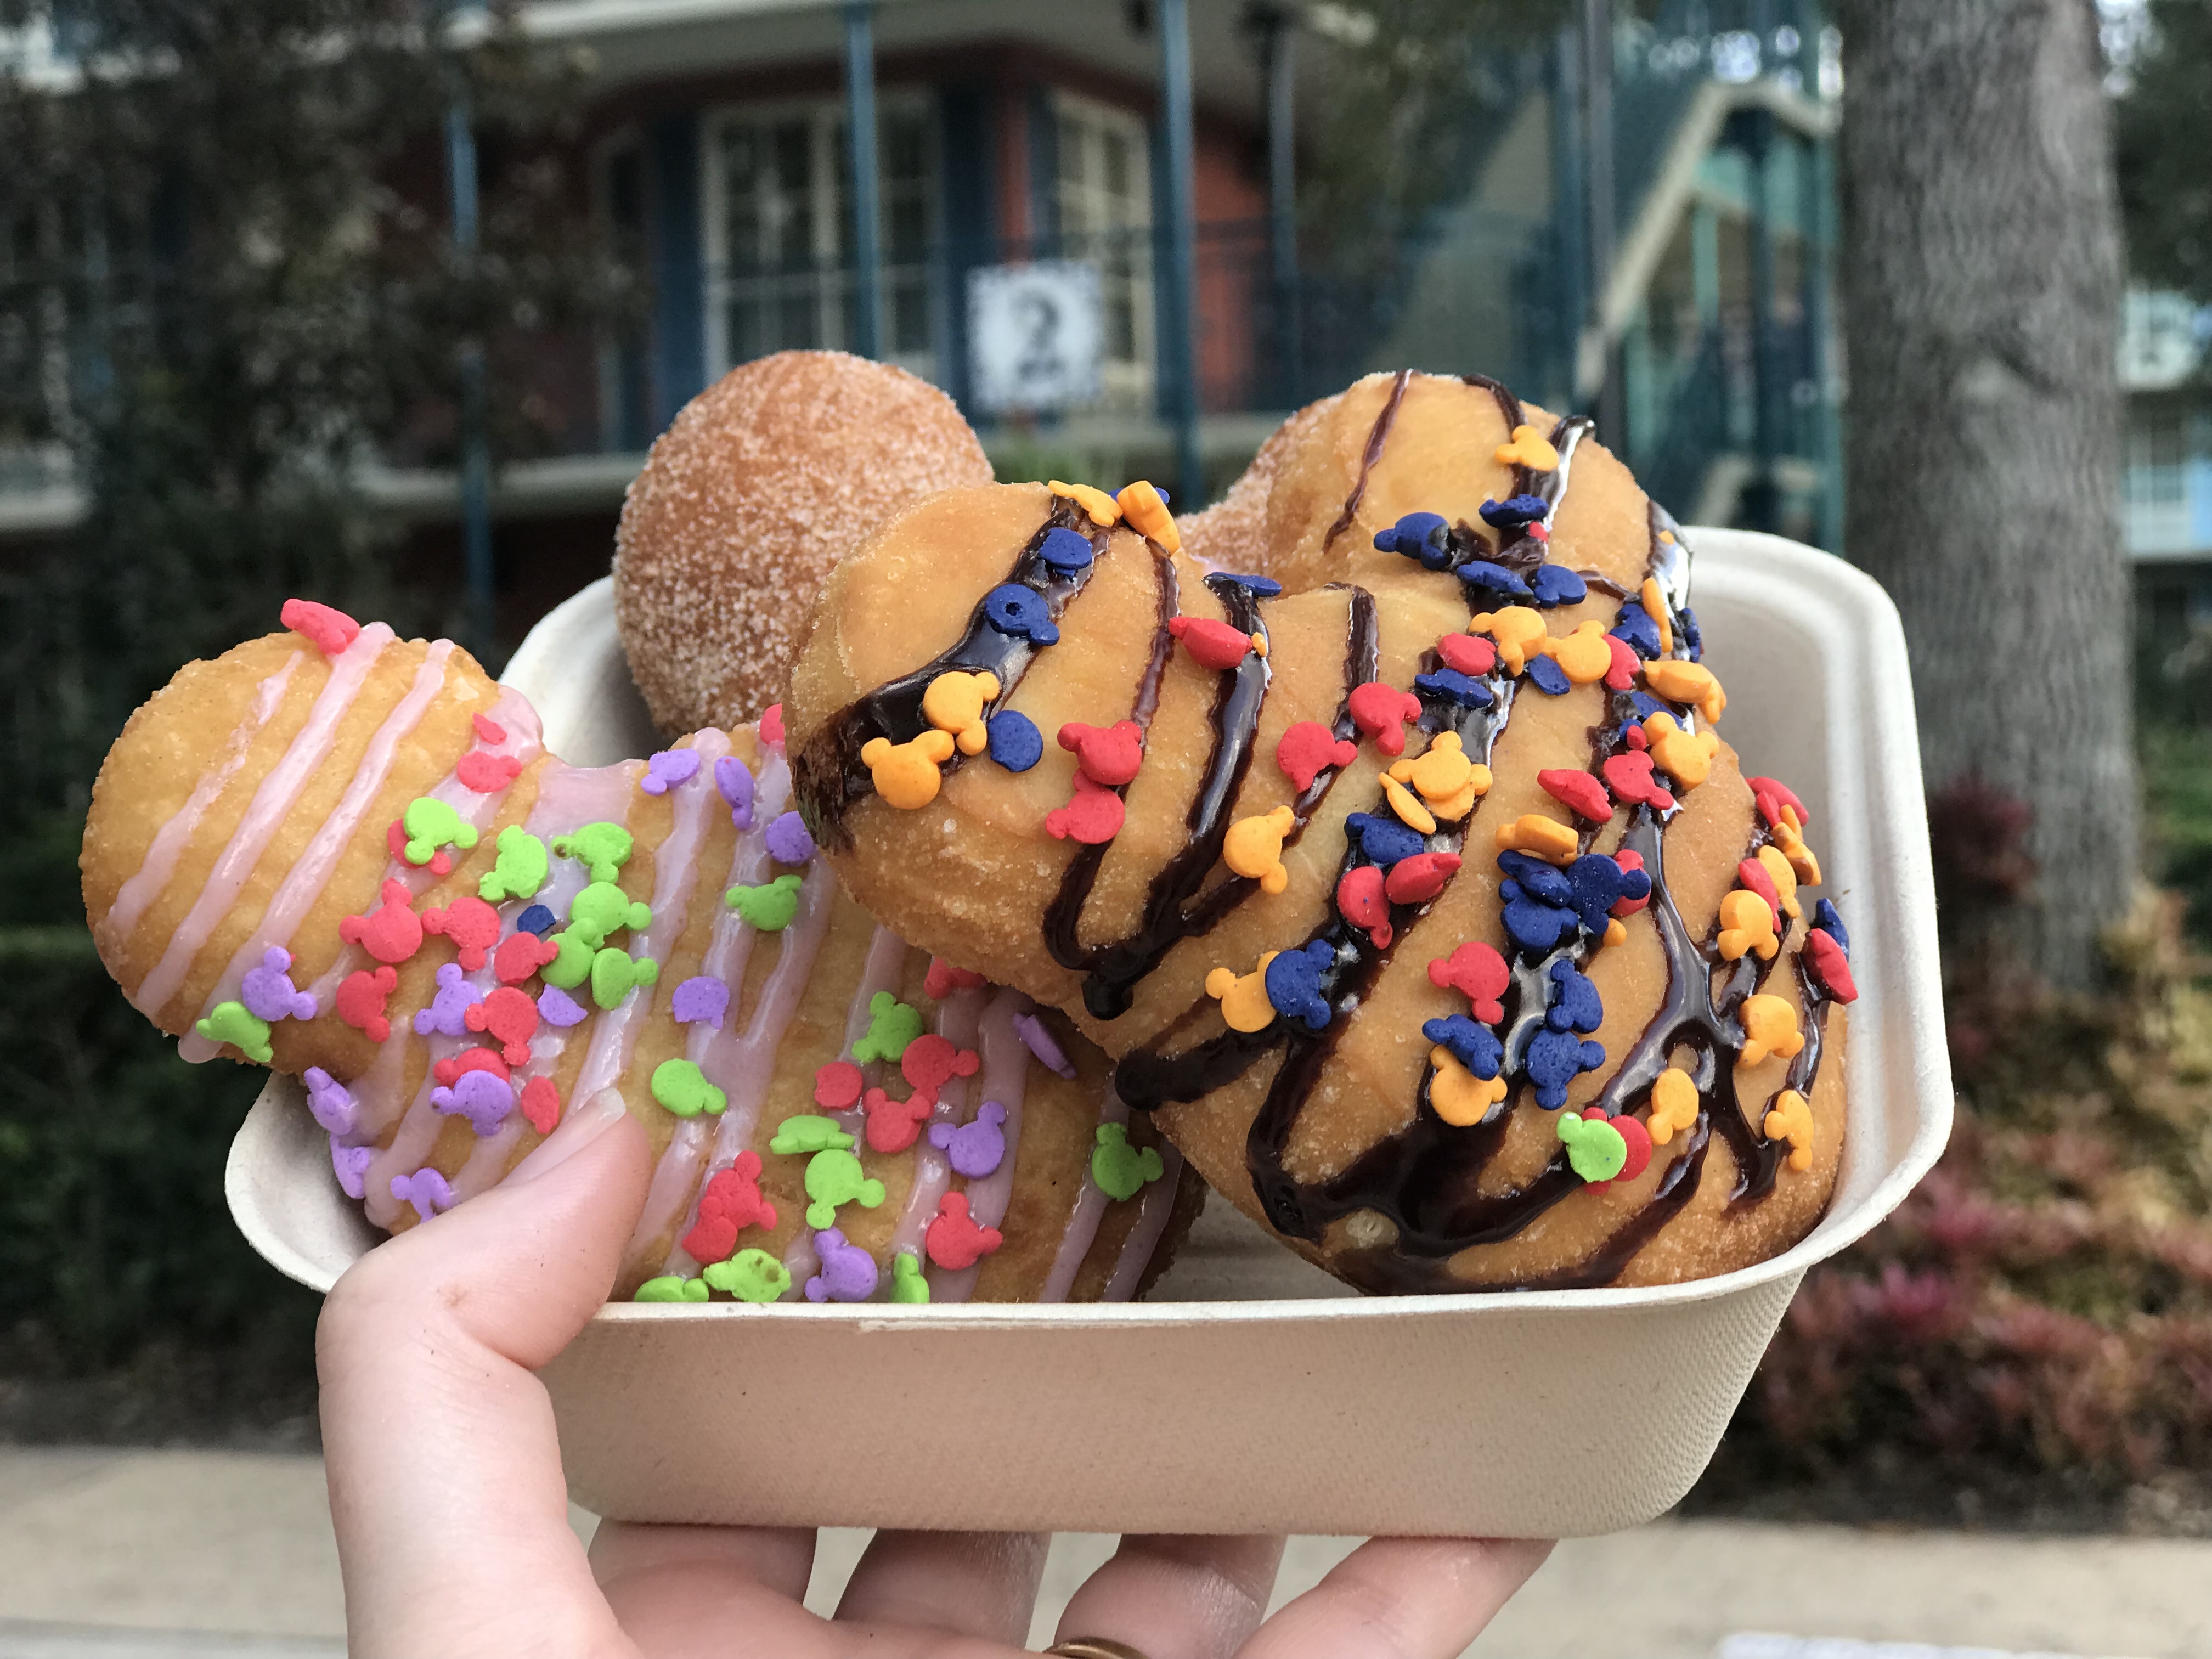 The French Quarter’s New Scat Cat’s Club Café Opens and Debuts Three New Beignet Flavors